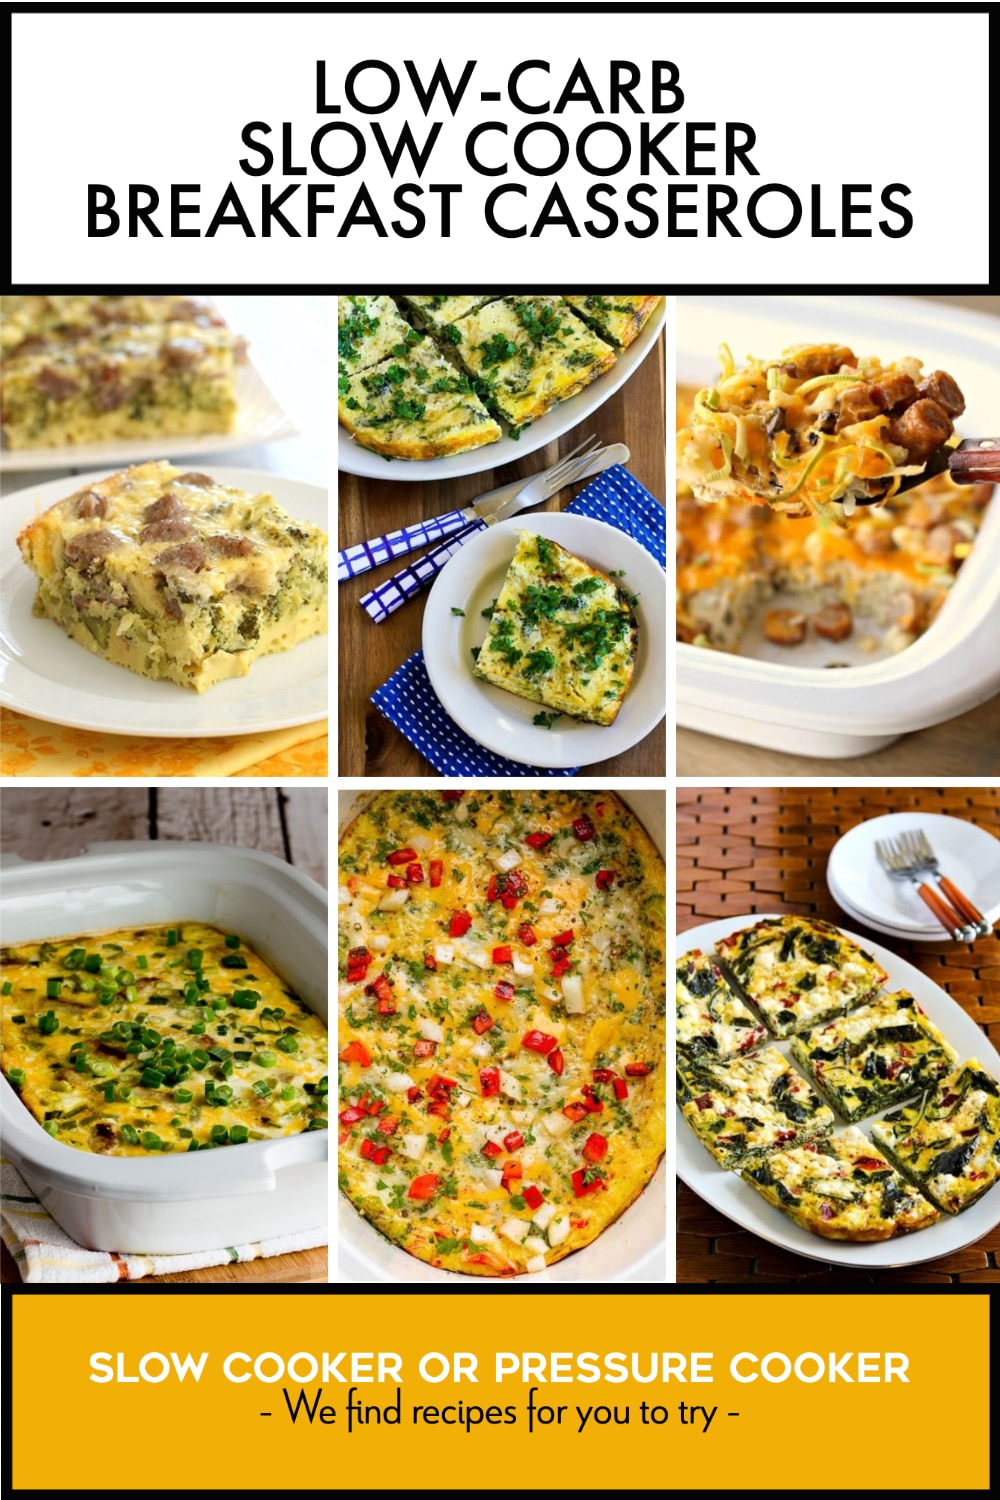 Pinterest image of Low-Carb Slow Cooker Breakfast Casseroles